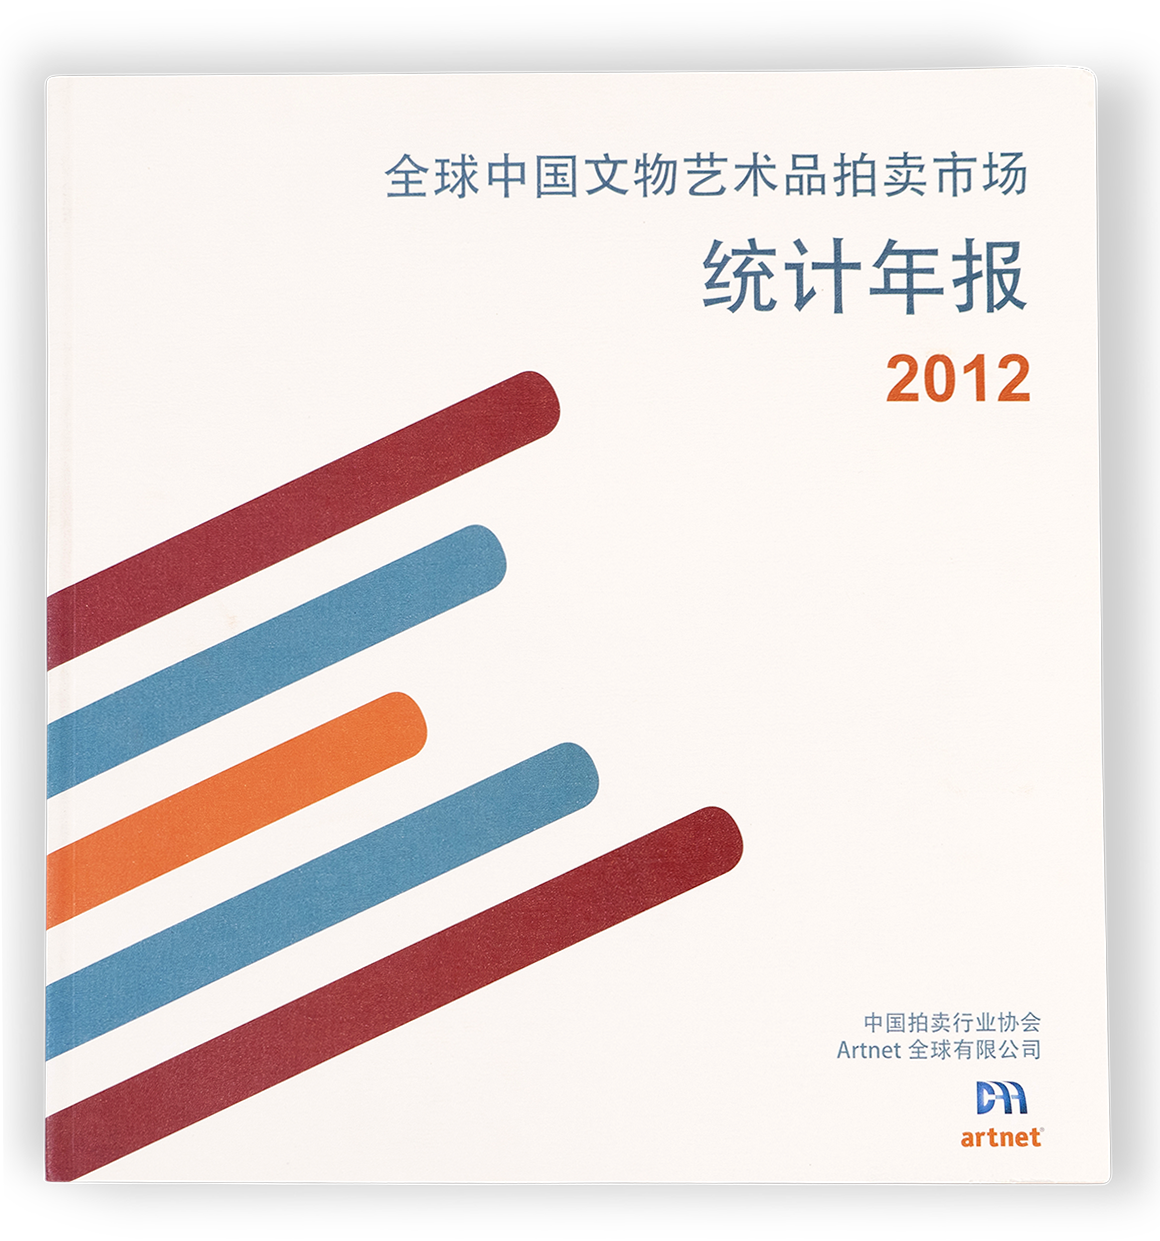 Global Chinese Art Auction Market Report, 2012, Chinese cover.